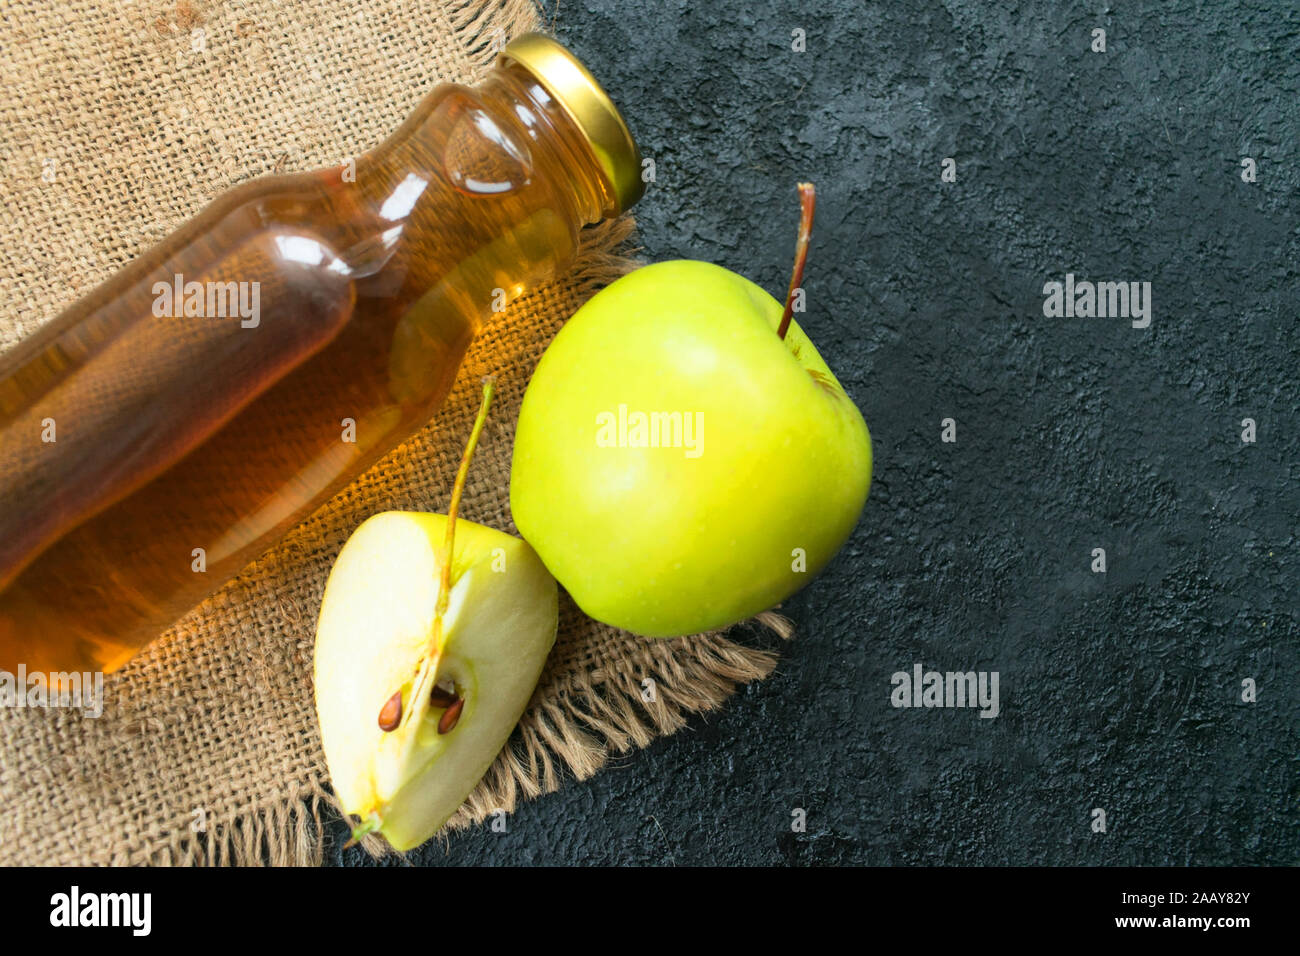 Apple juice in a bottle and a green apple on a black background. Flat lay. Copy space. Stock Photo